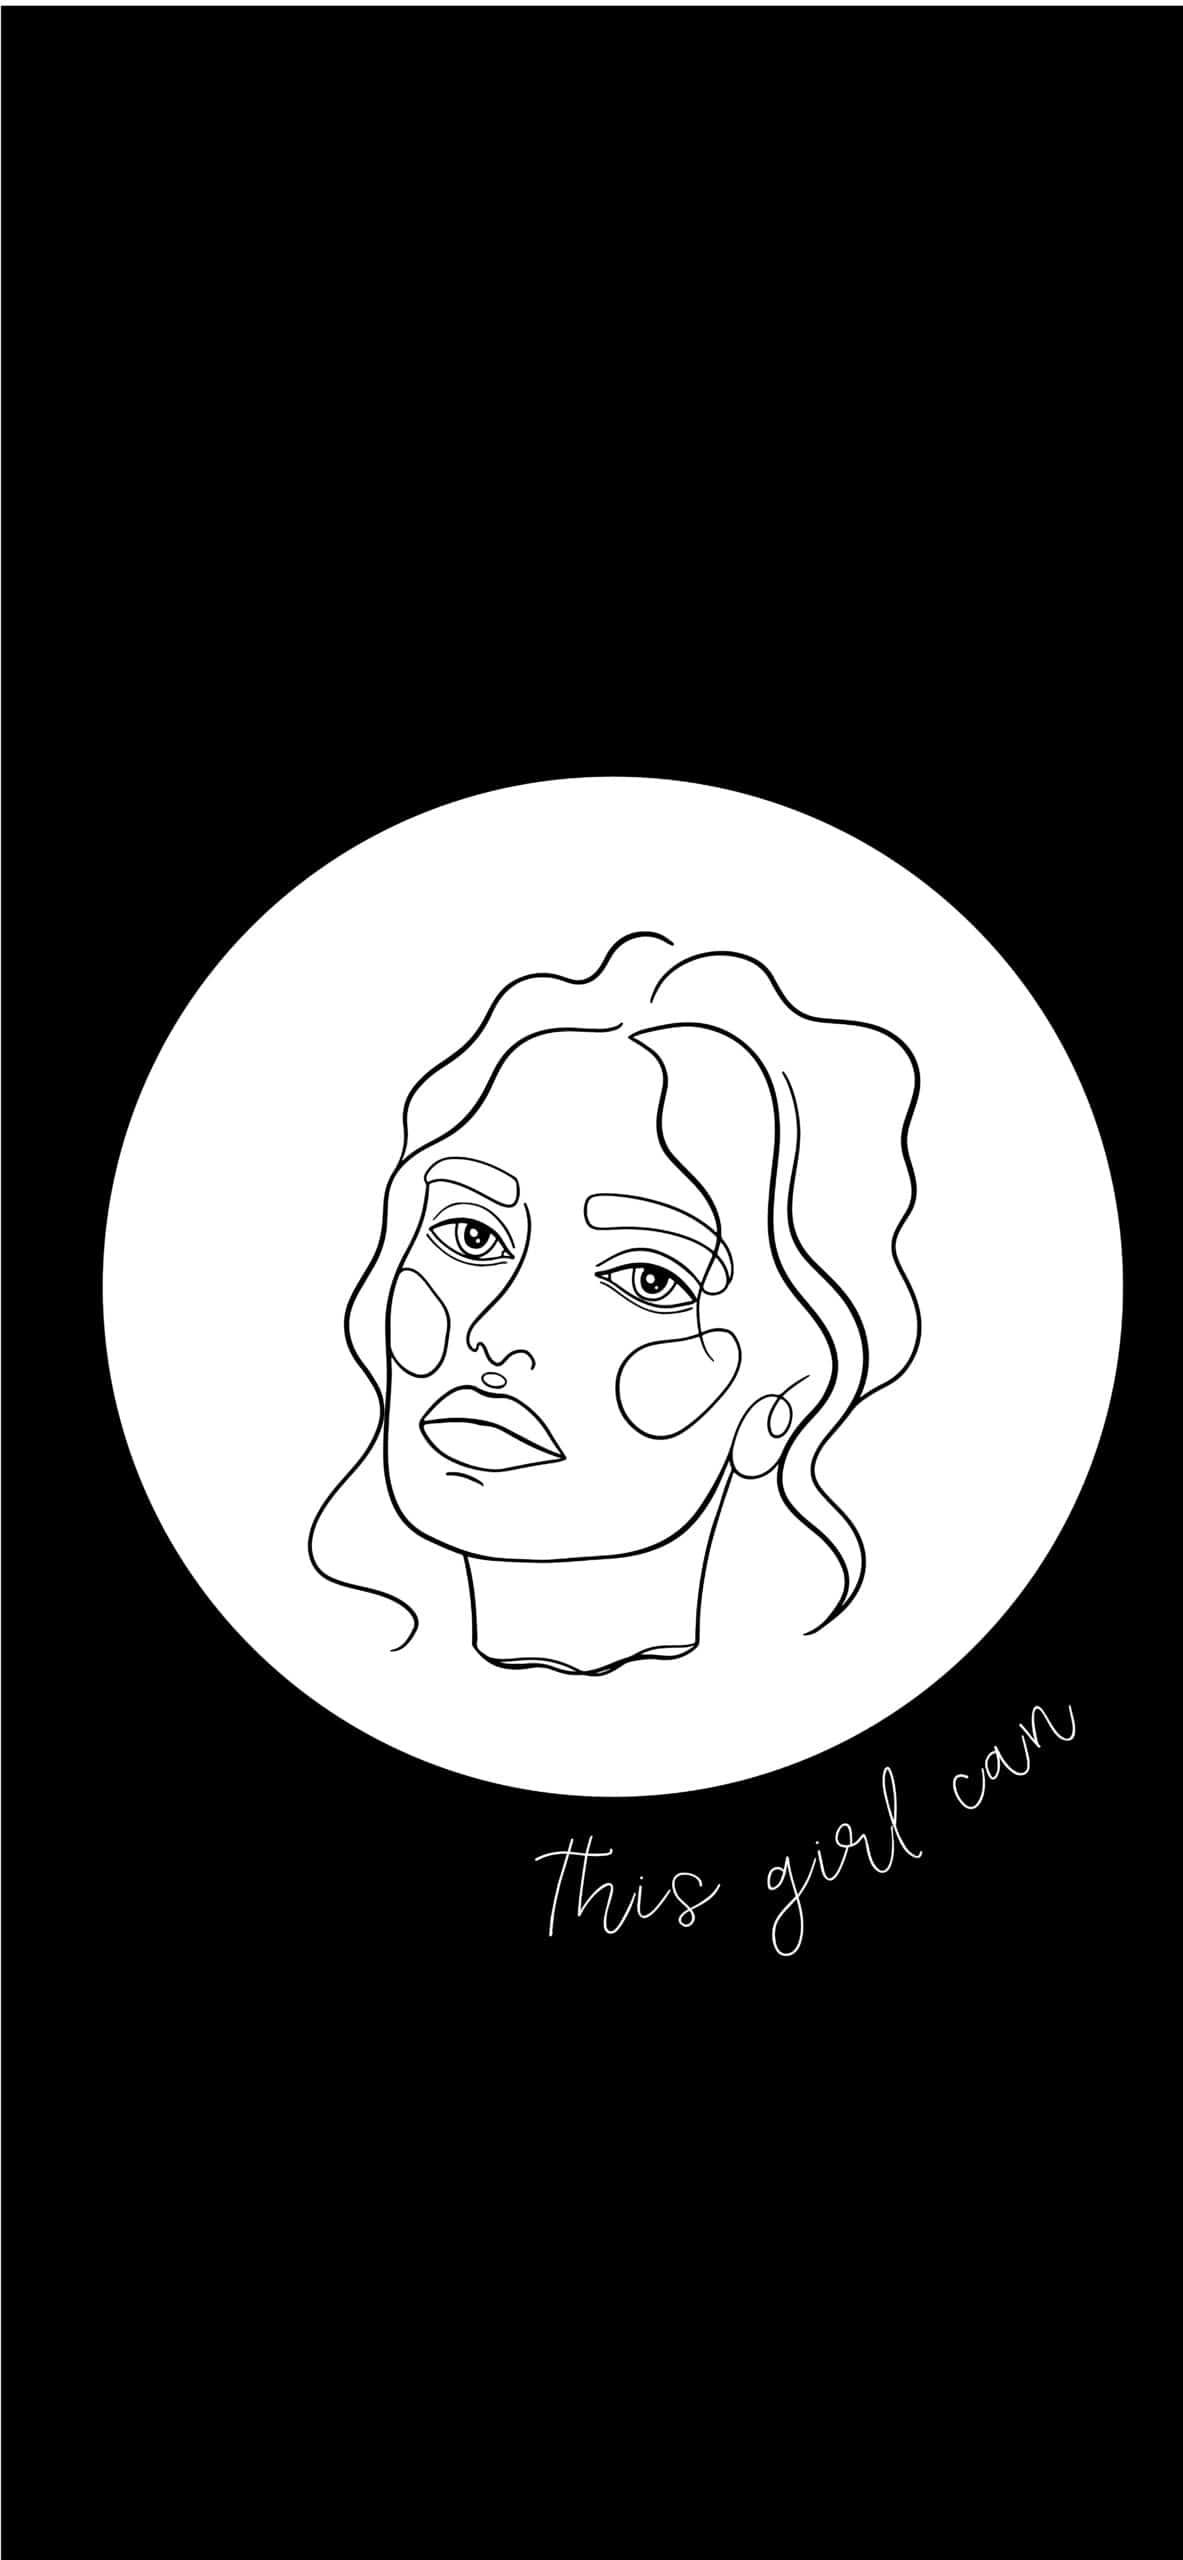 Stunning Line Art Girl iPhone Wallpaper and Wall Art You Need To Get!